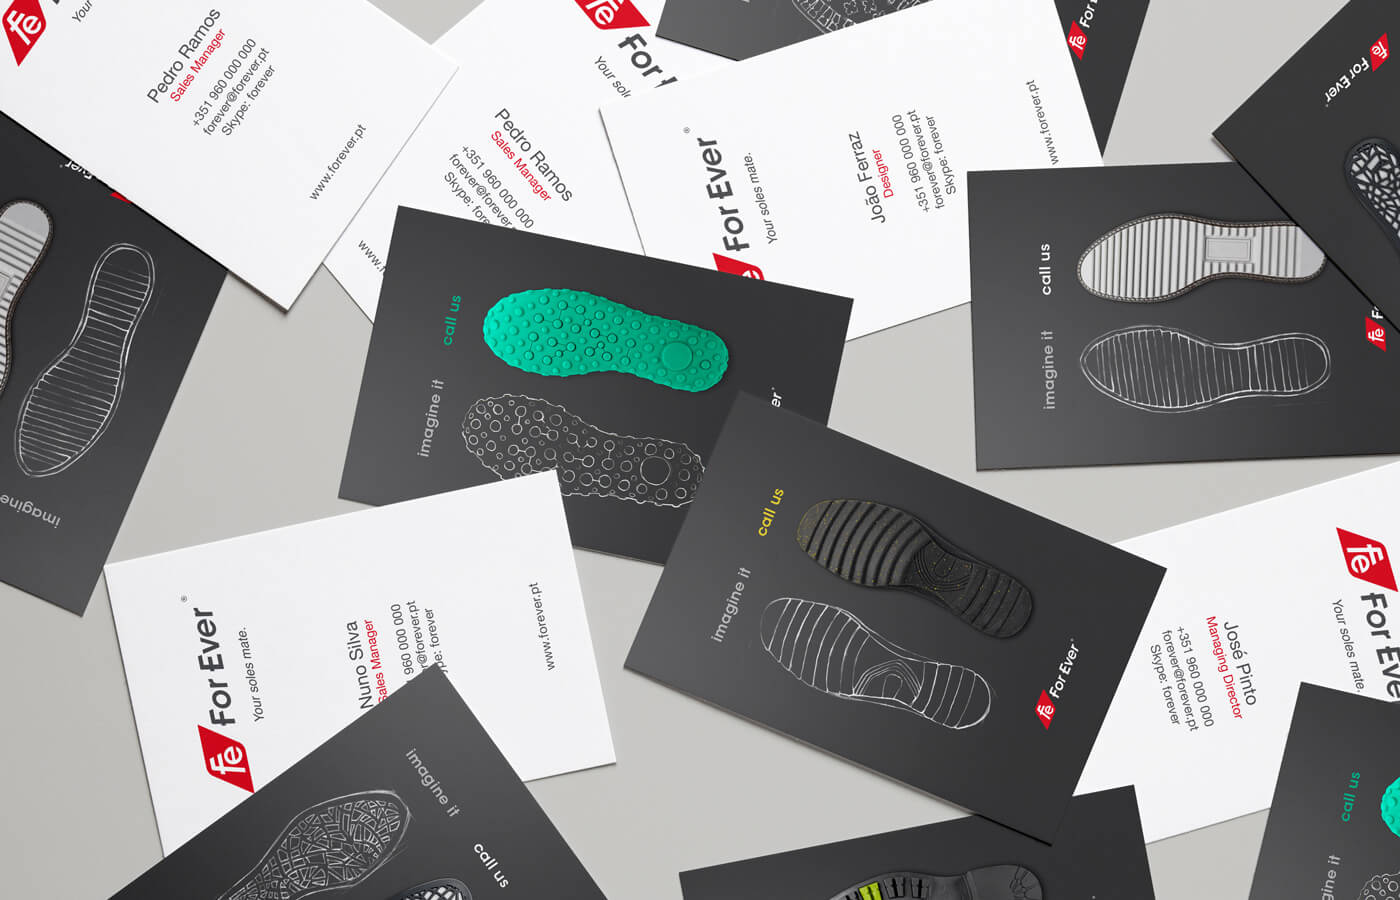 Footwear, soles, branding, industry, manufacture, factory, stationary, design, marketing